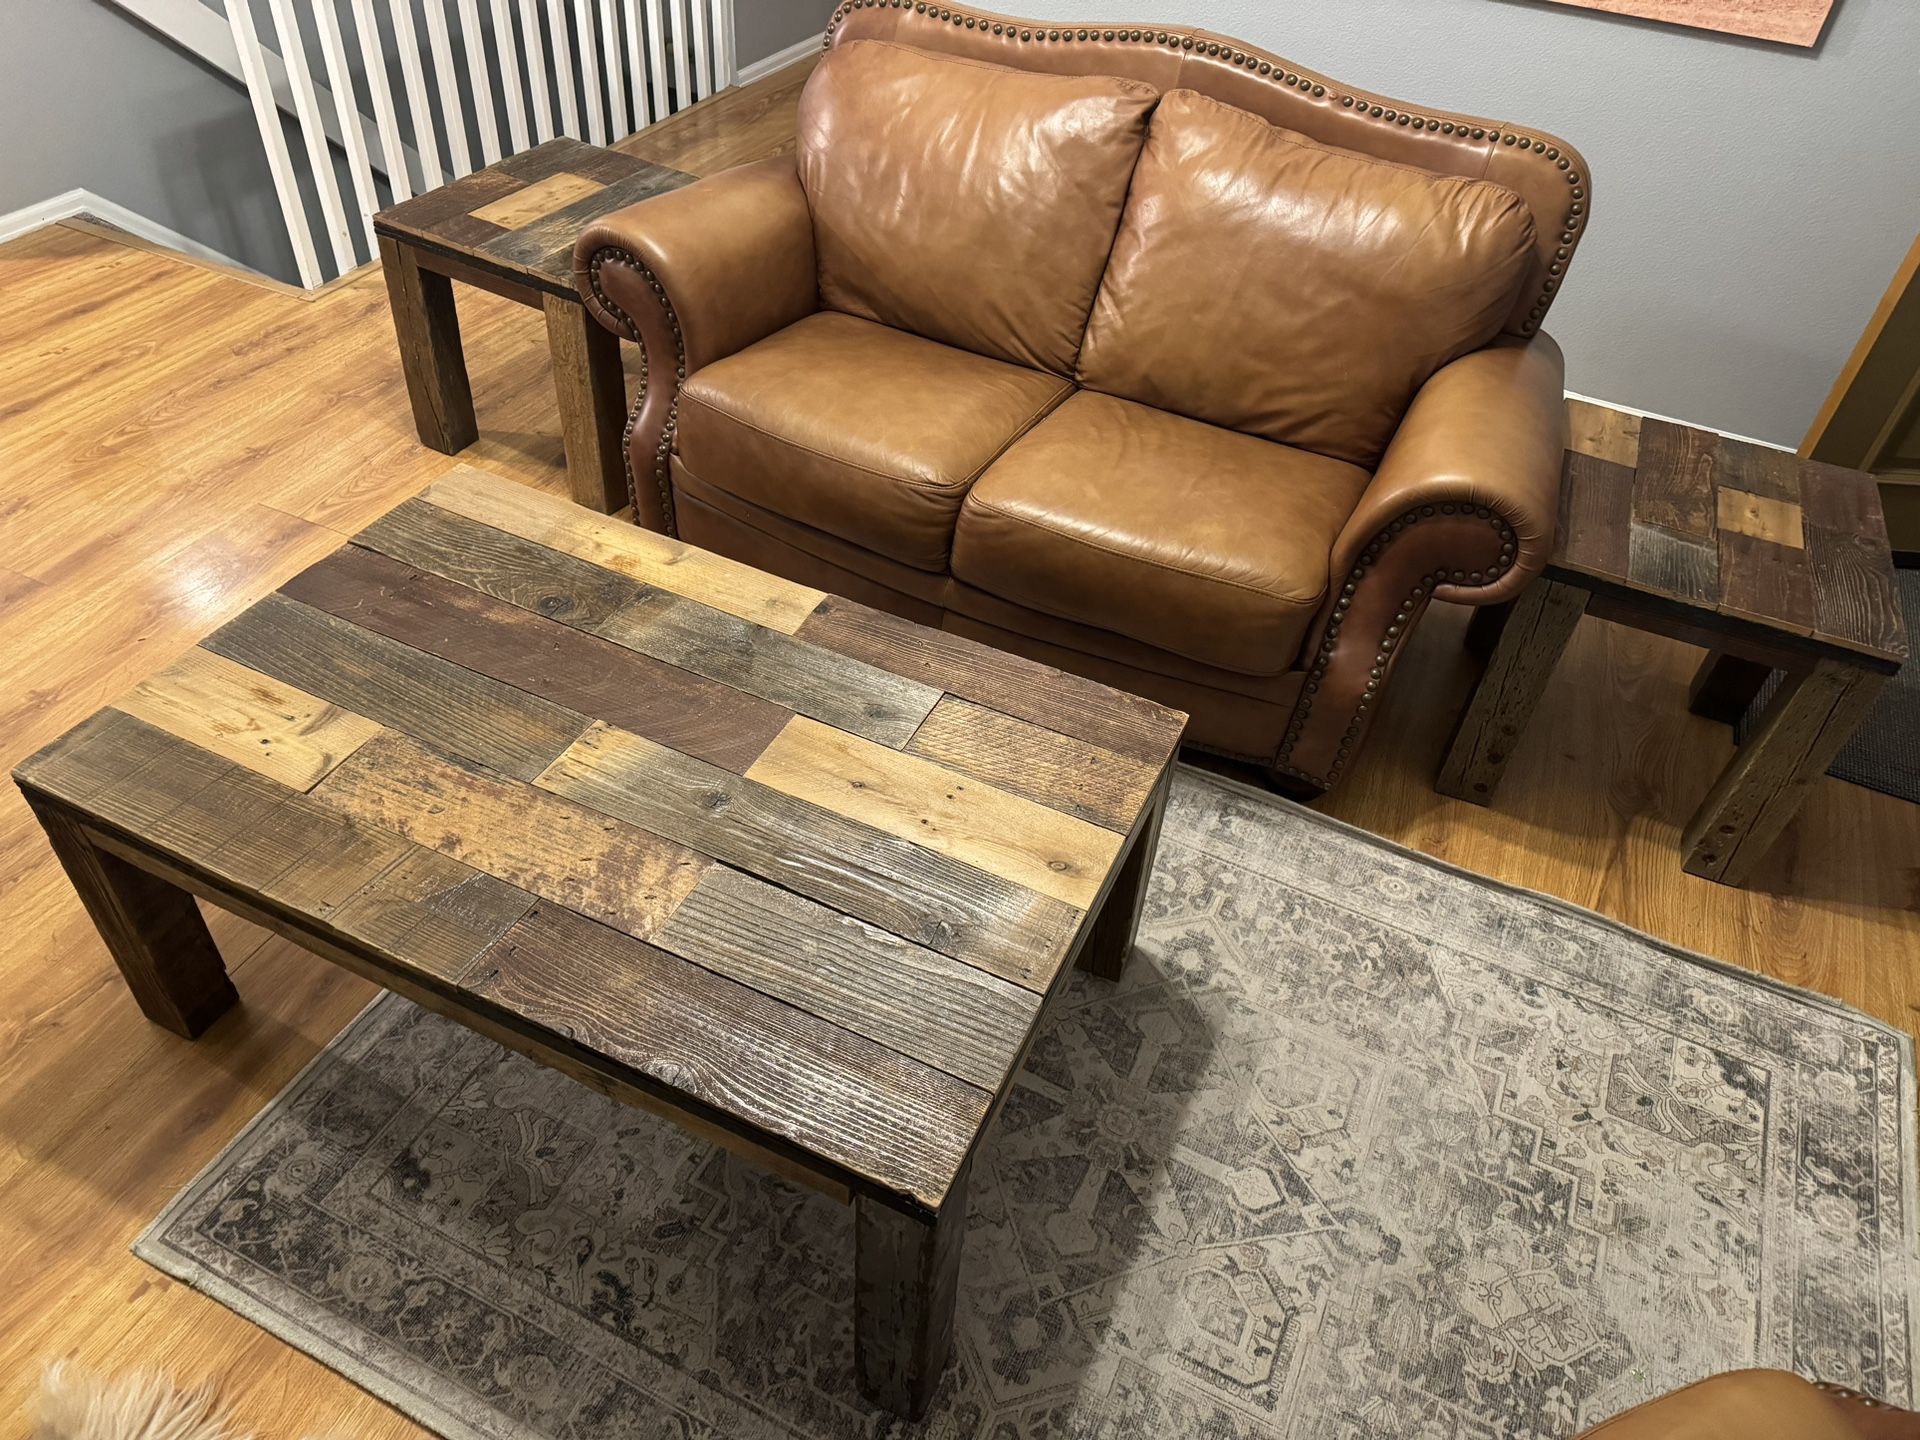 Rustic Reclaimed Wood Coffee and End Tables